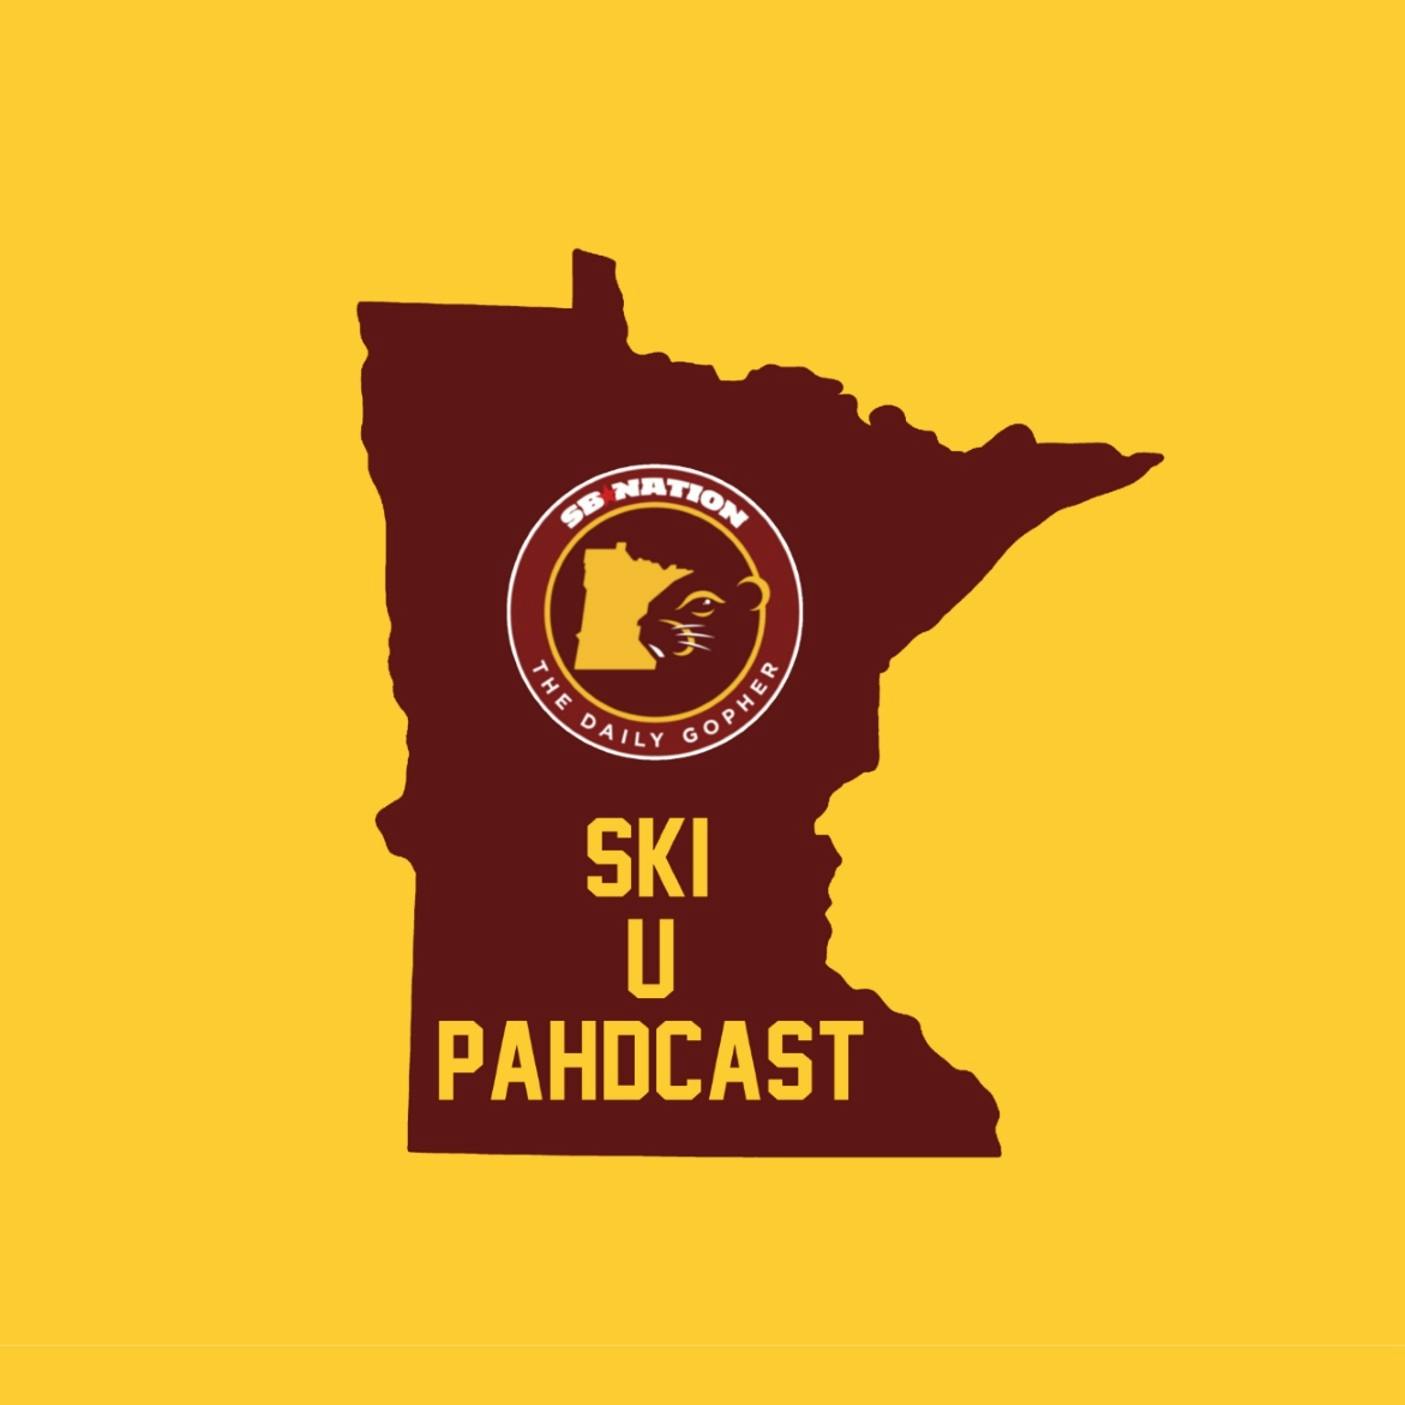 Ski-U-Pahdcast - Ep 5.35: Softball is done, track hunts some titles, and SCHEDULING NEWS